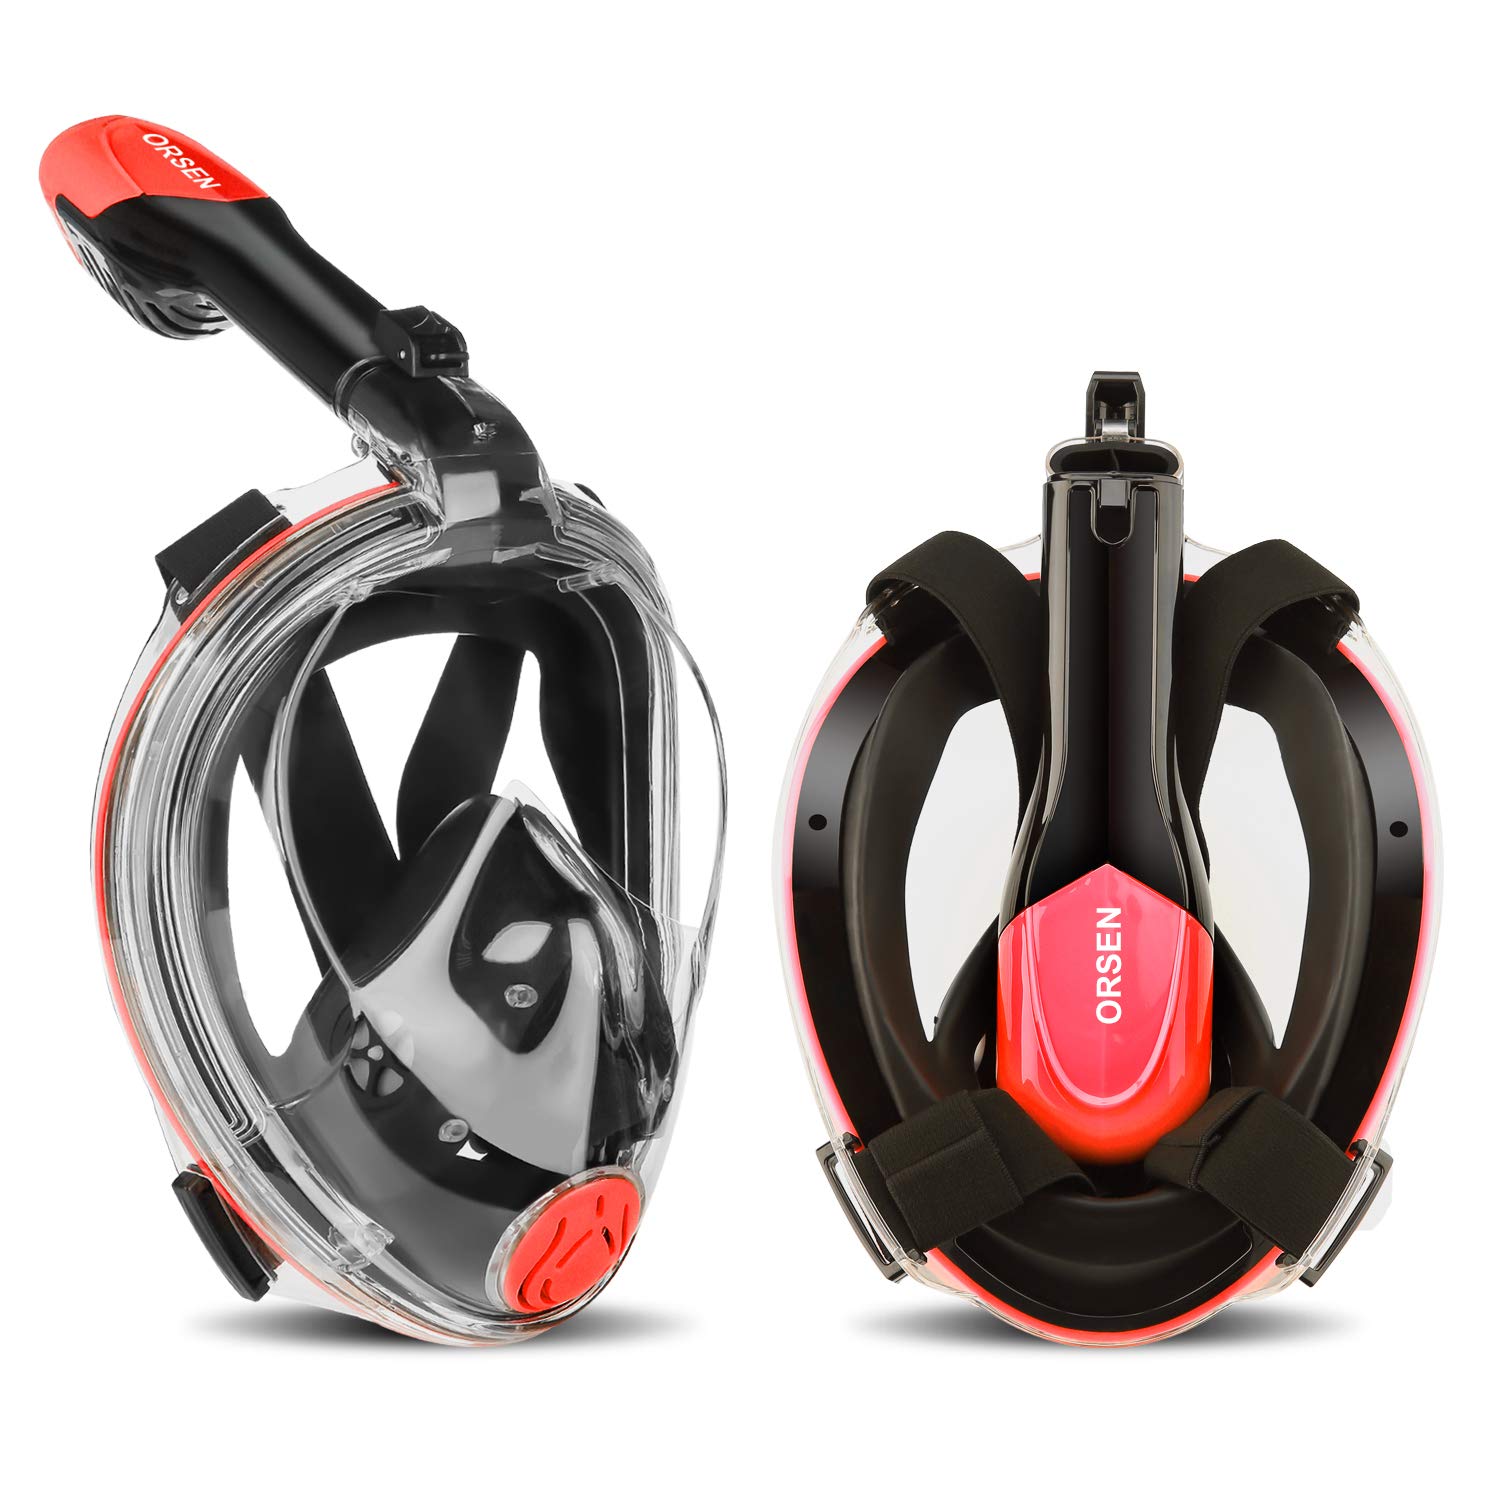 Win a Full Face Snorkel Mask!